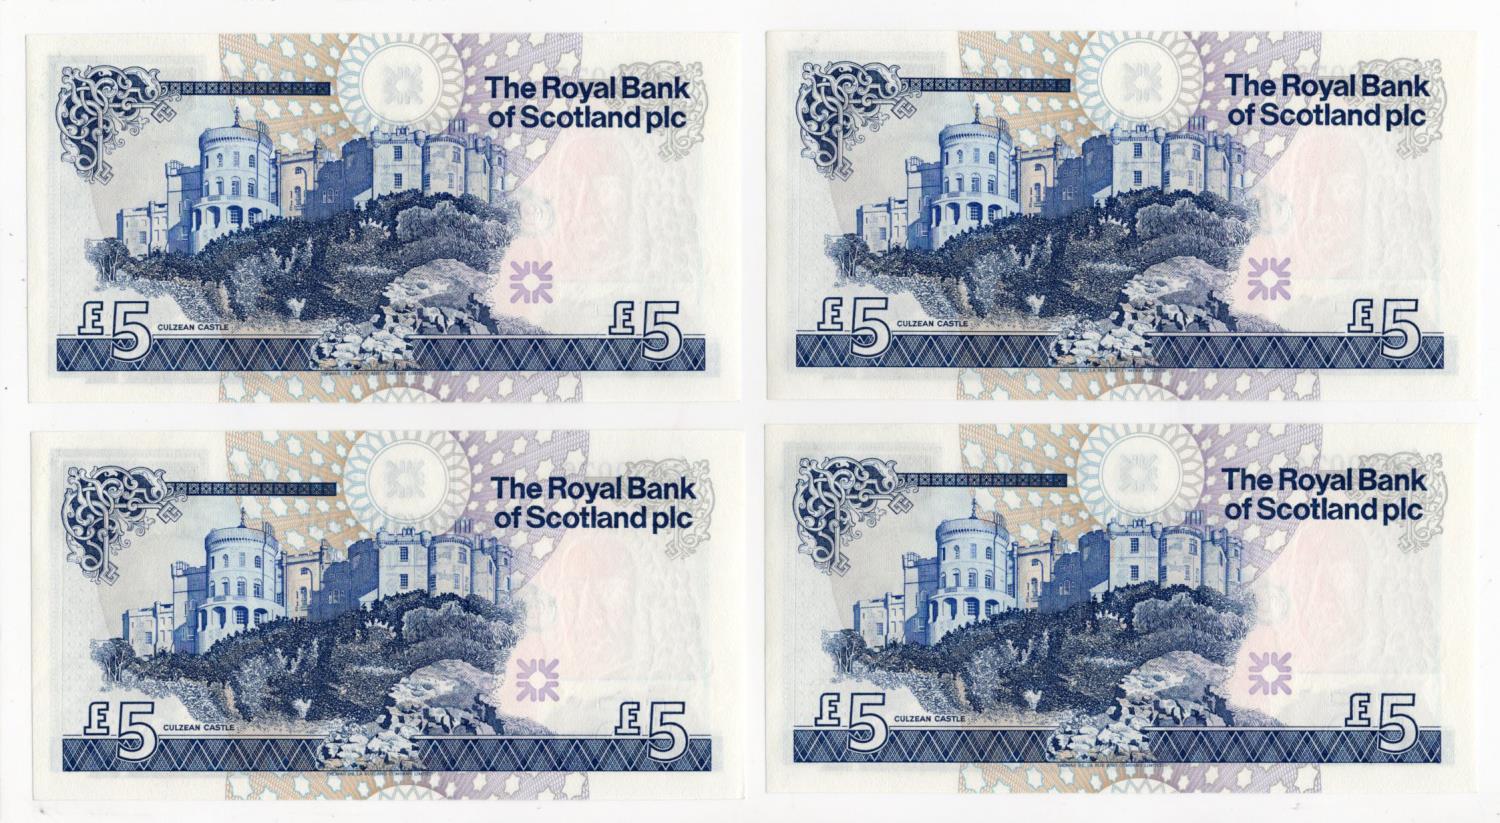 Scotland, Royal Bank of Scotland 5 Pounds (4) dated 13th December 1988, signed R.M. Maiden, a - Image 2 of 2